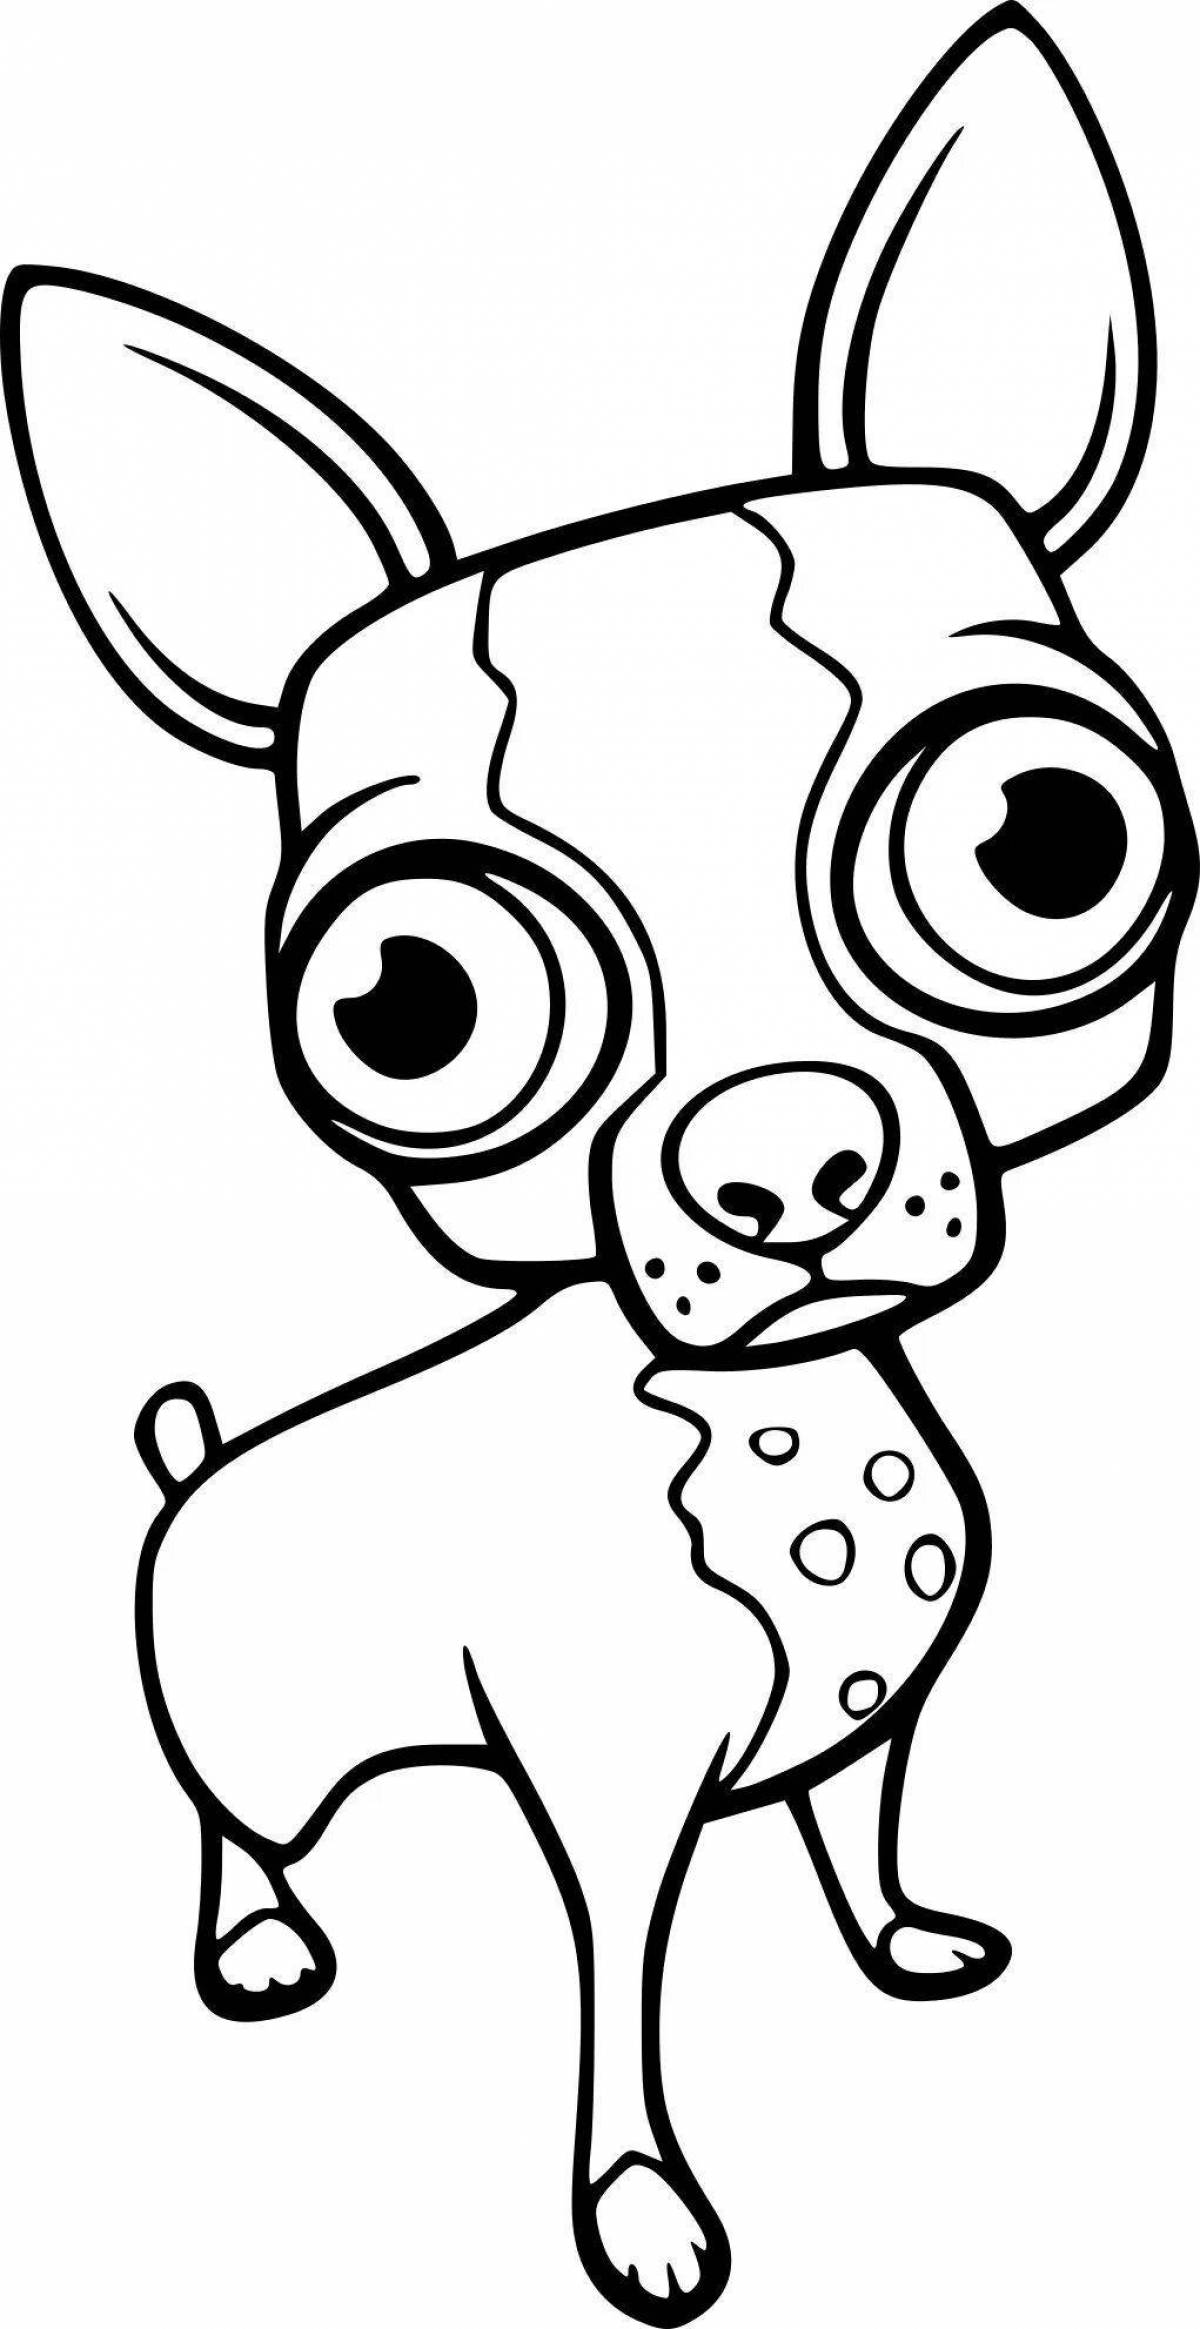 Innovative chihuahua coloring book for kids